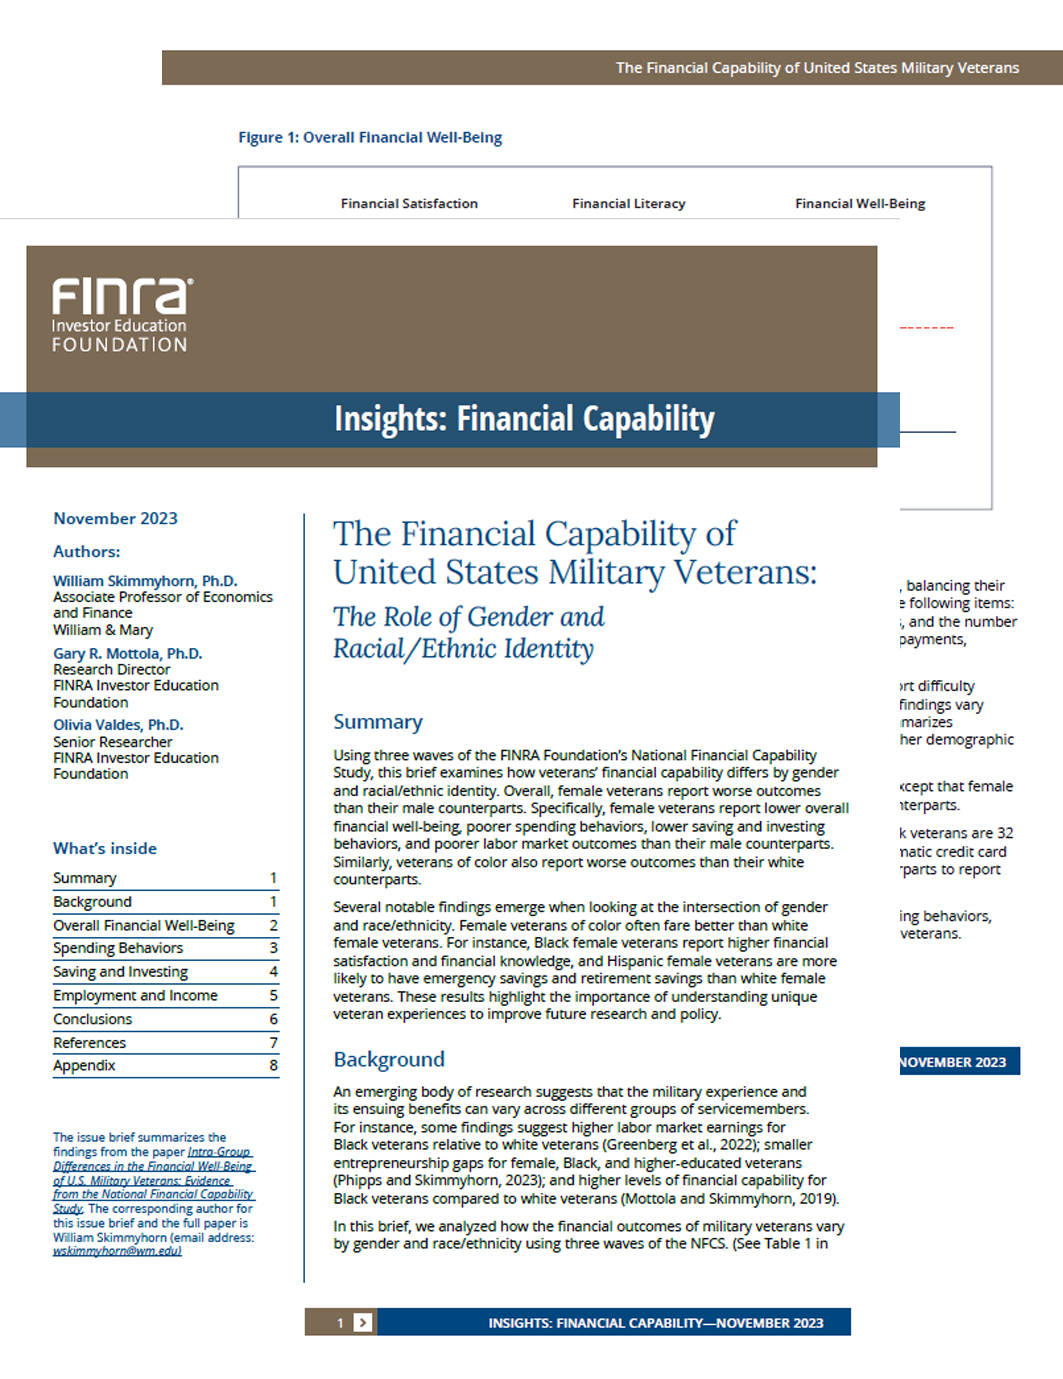 The Financial Capability of United States Military Veterans: The Role of Gender and Racial/Ethnic Identity